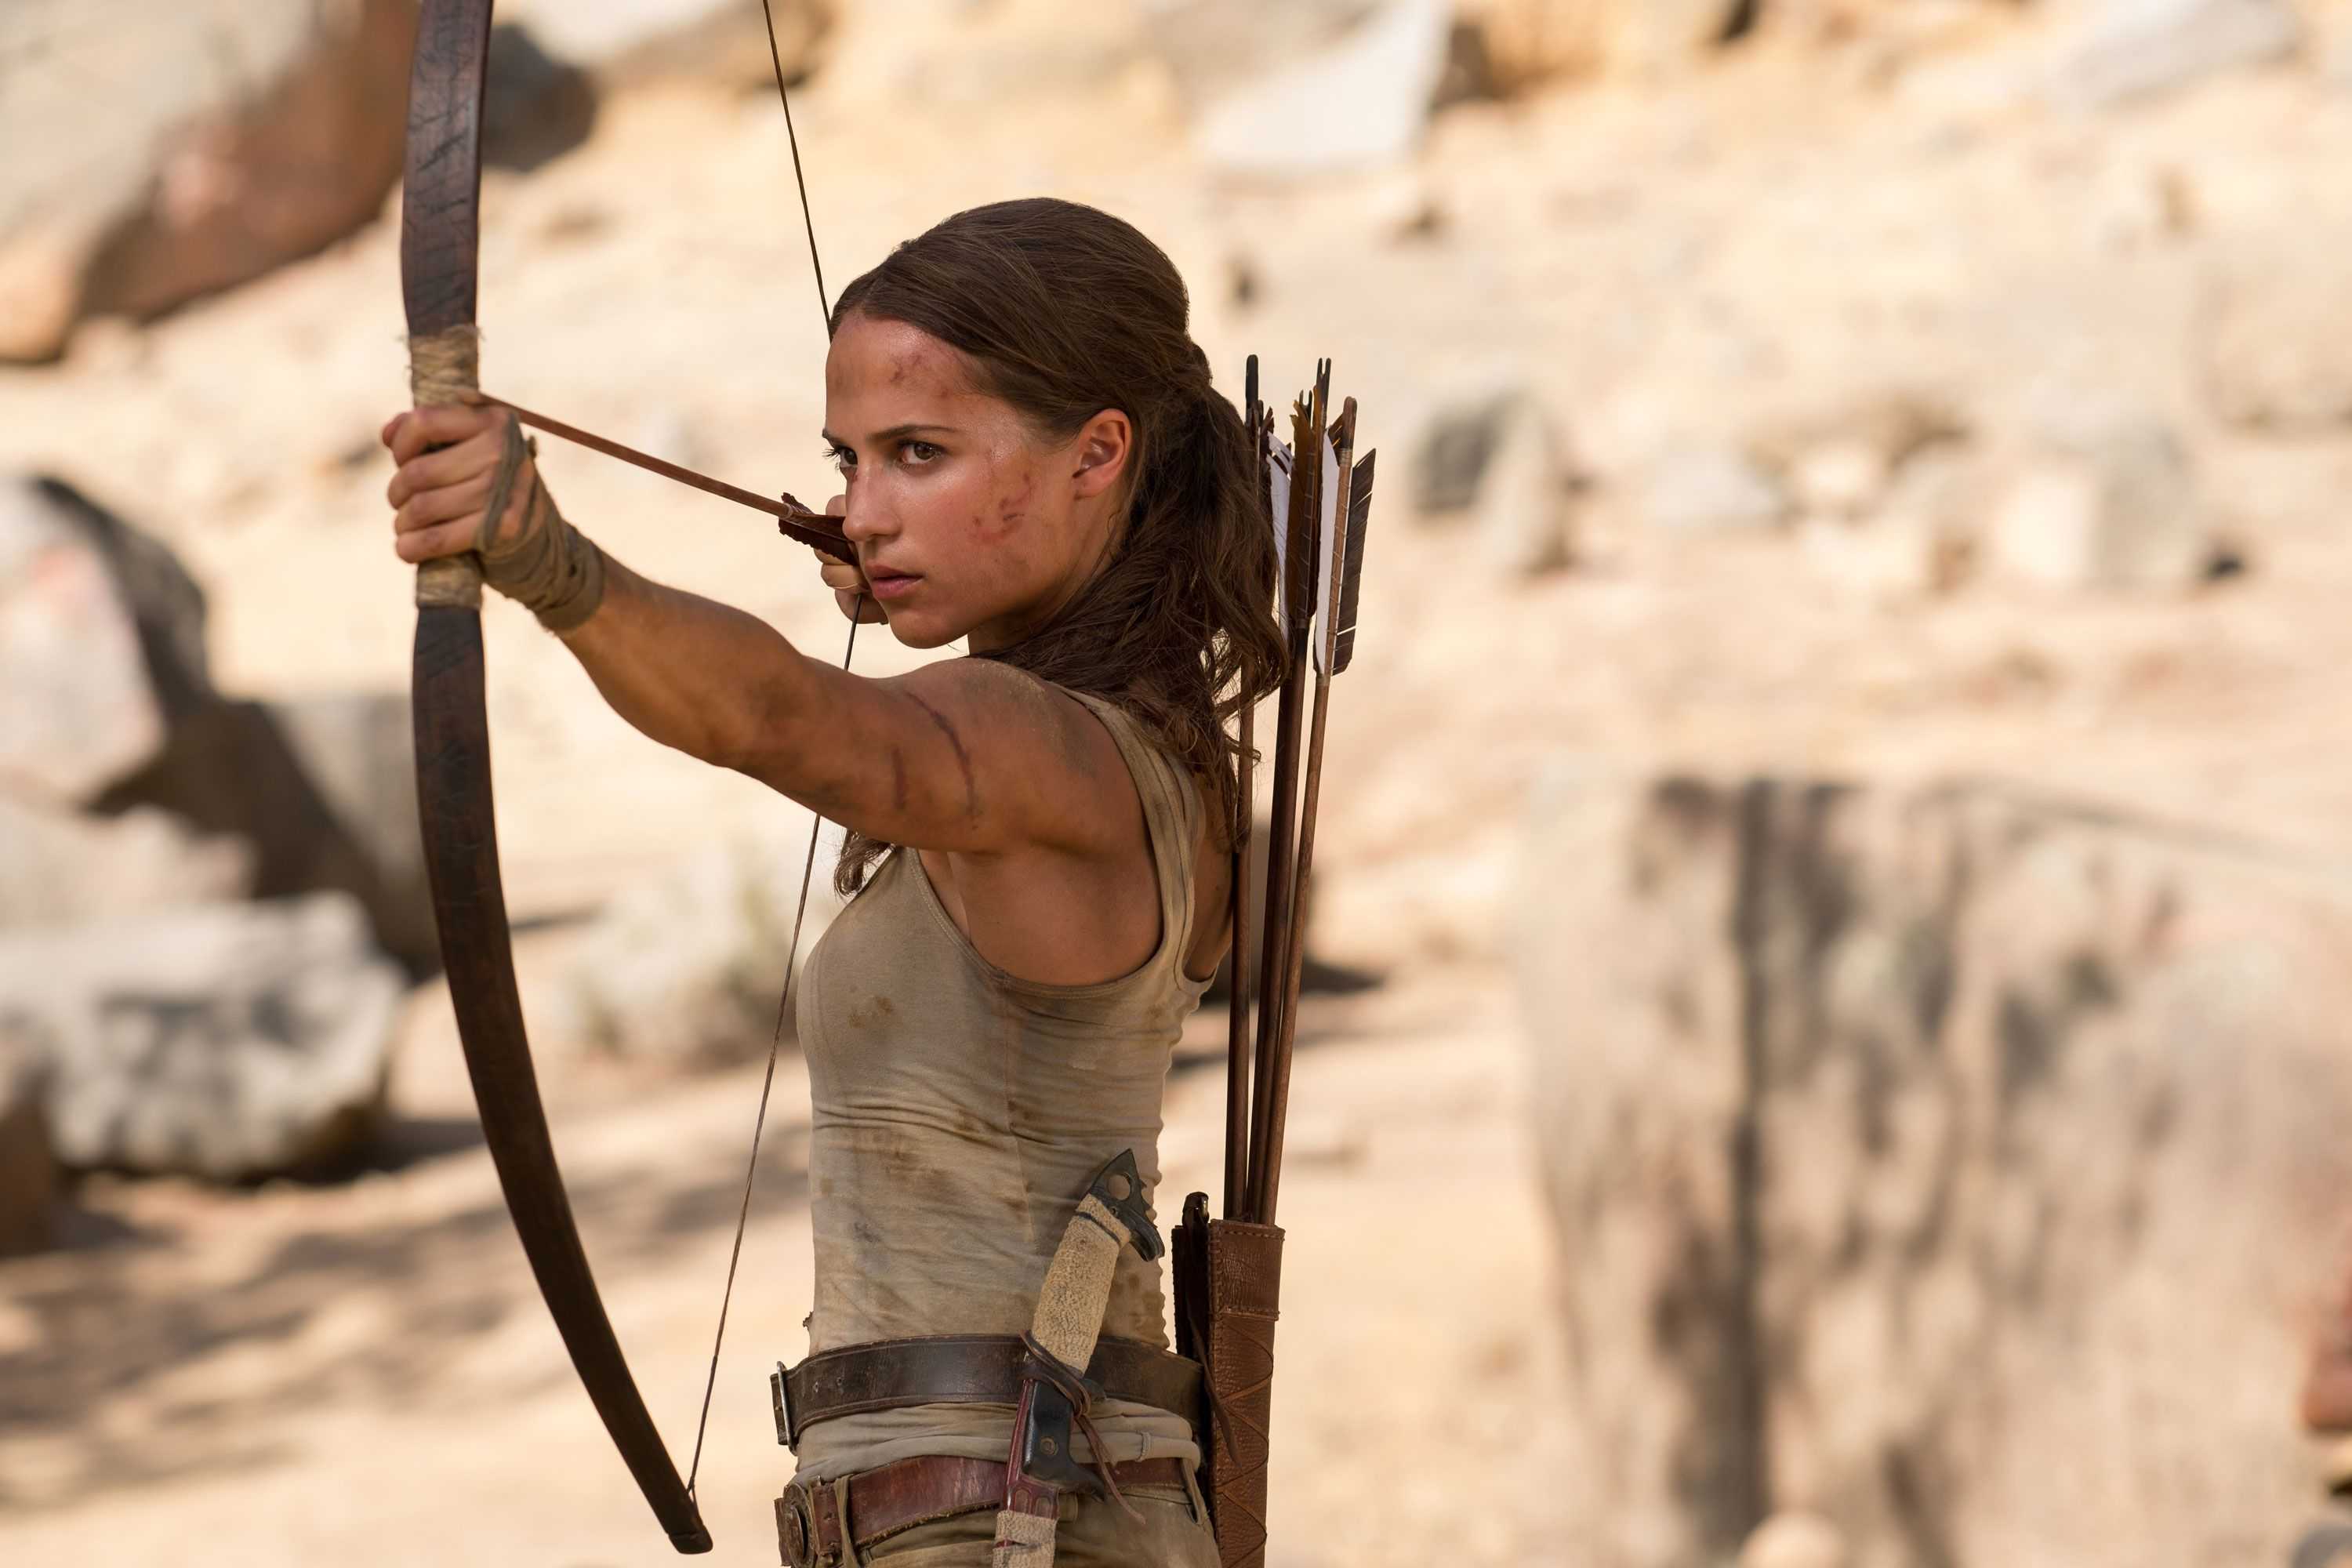 Tomb Raider sequel cancelled after MGM loses rights; A new reboot in the works